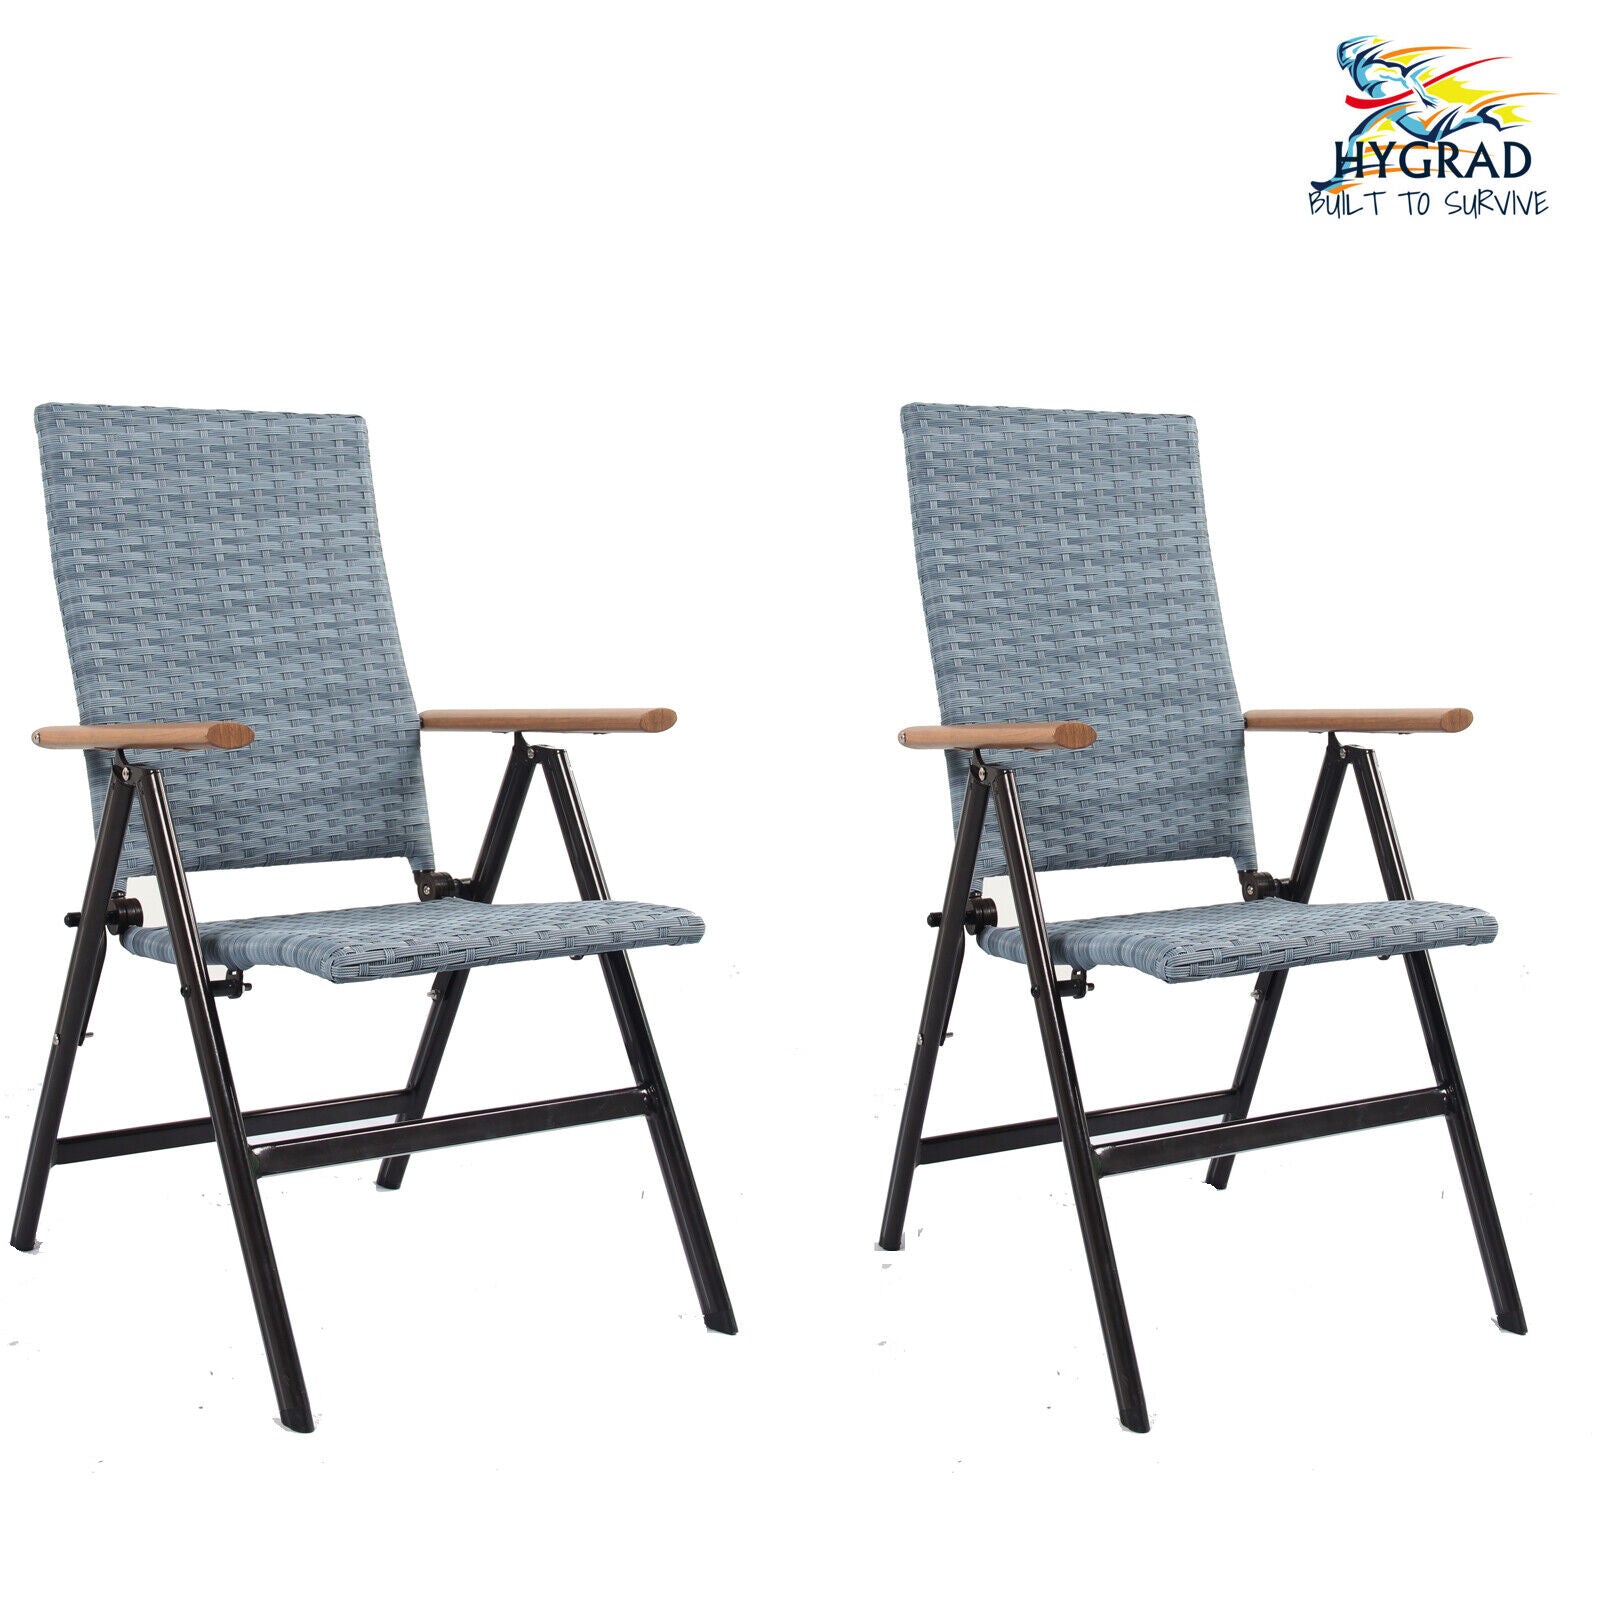 Pair of Outdoor Folding Rattan Chairs 7 Position Rattan Garden Chairs Grey/Brown